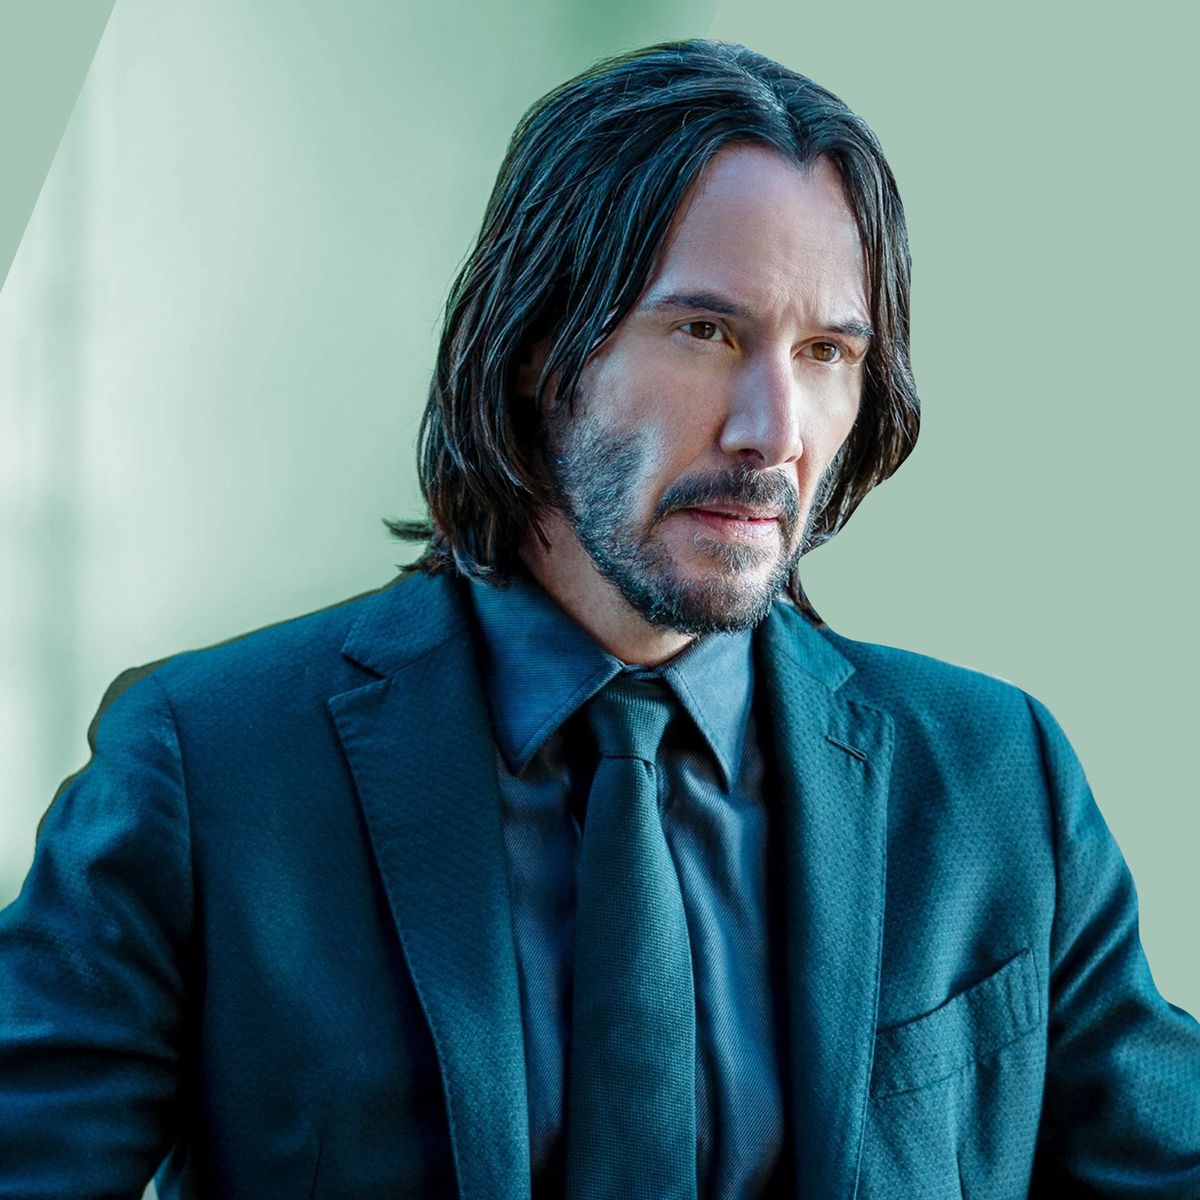 Third act saves John Wick 4 from being worst sequel in film series, Lifestyle